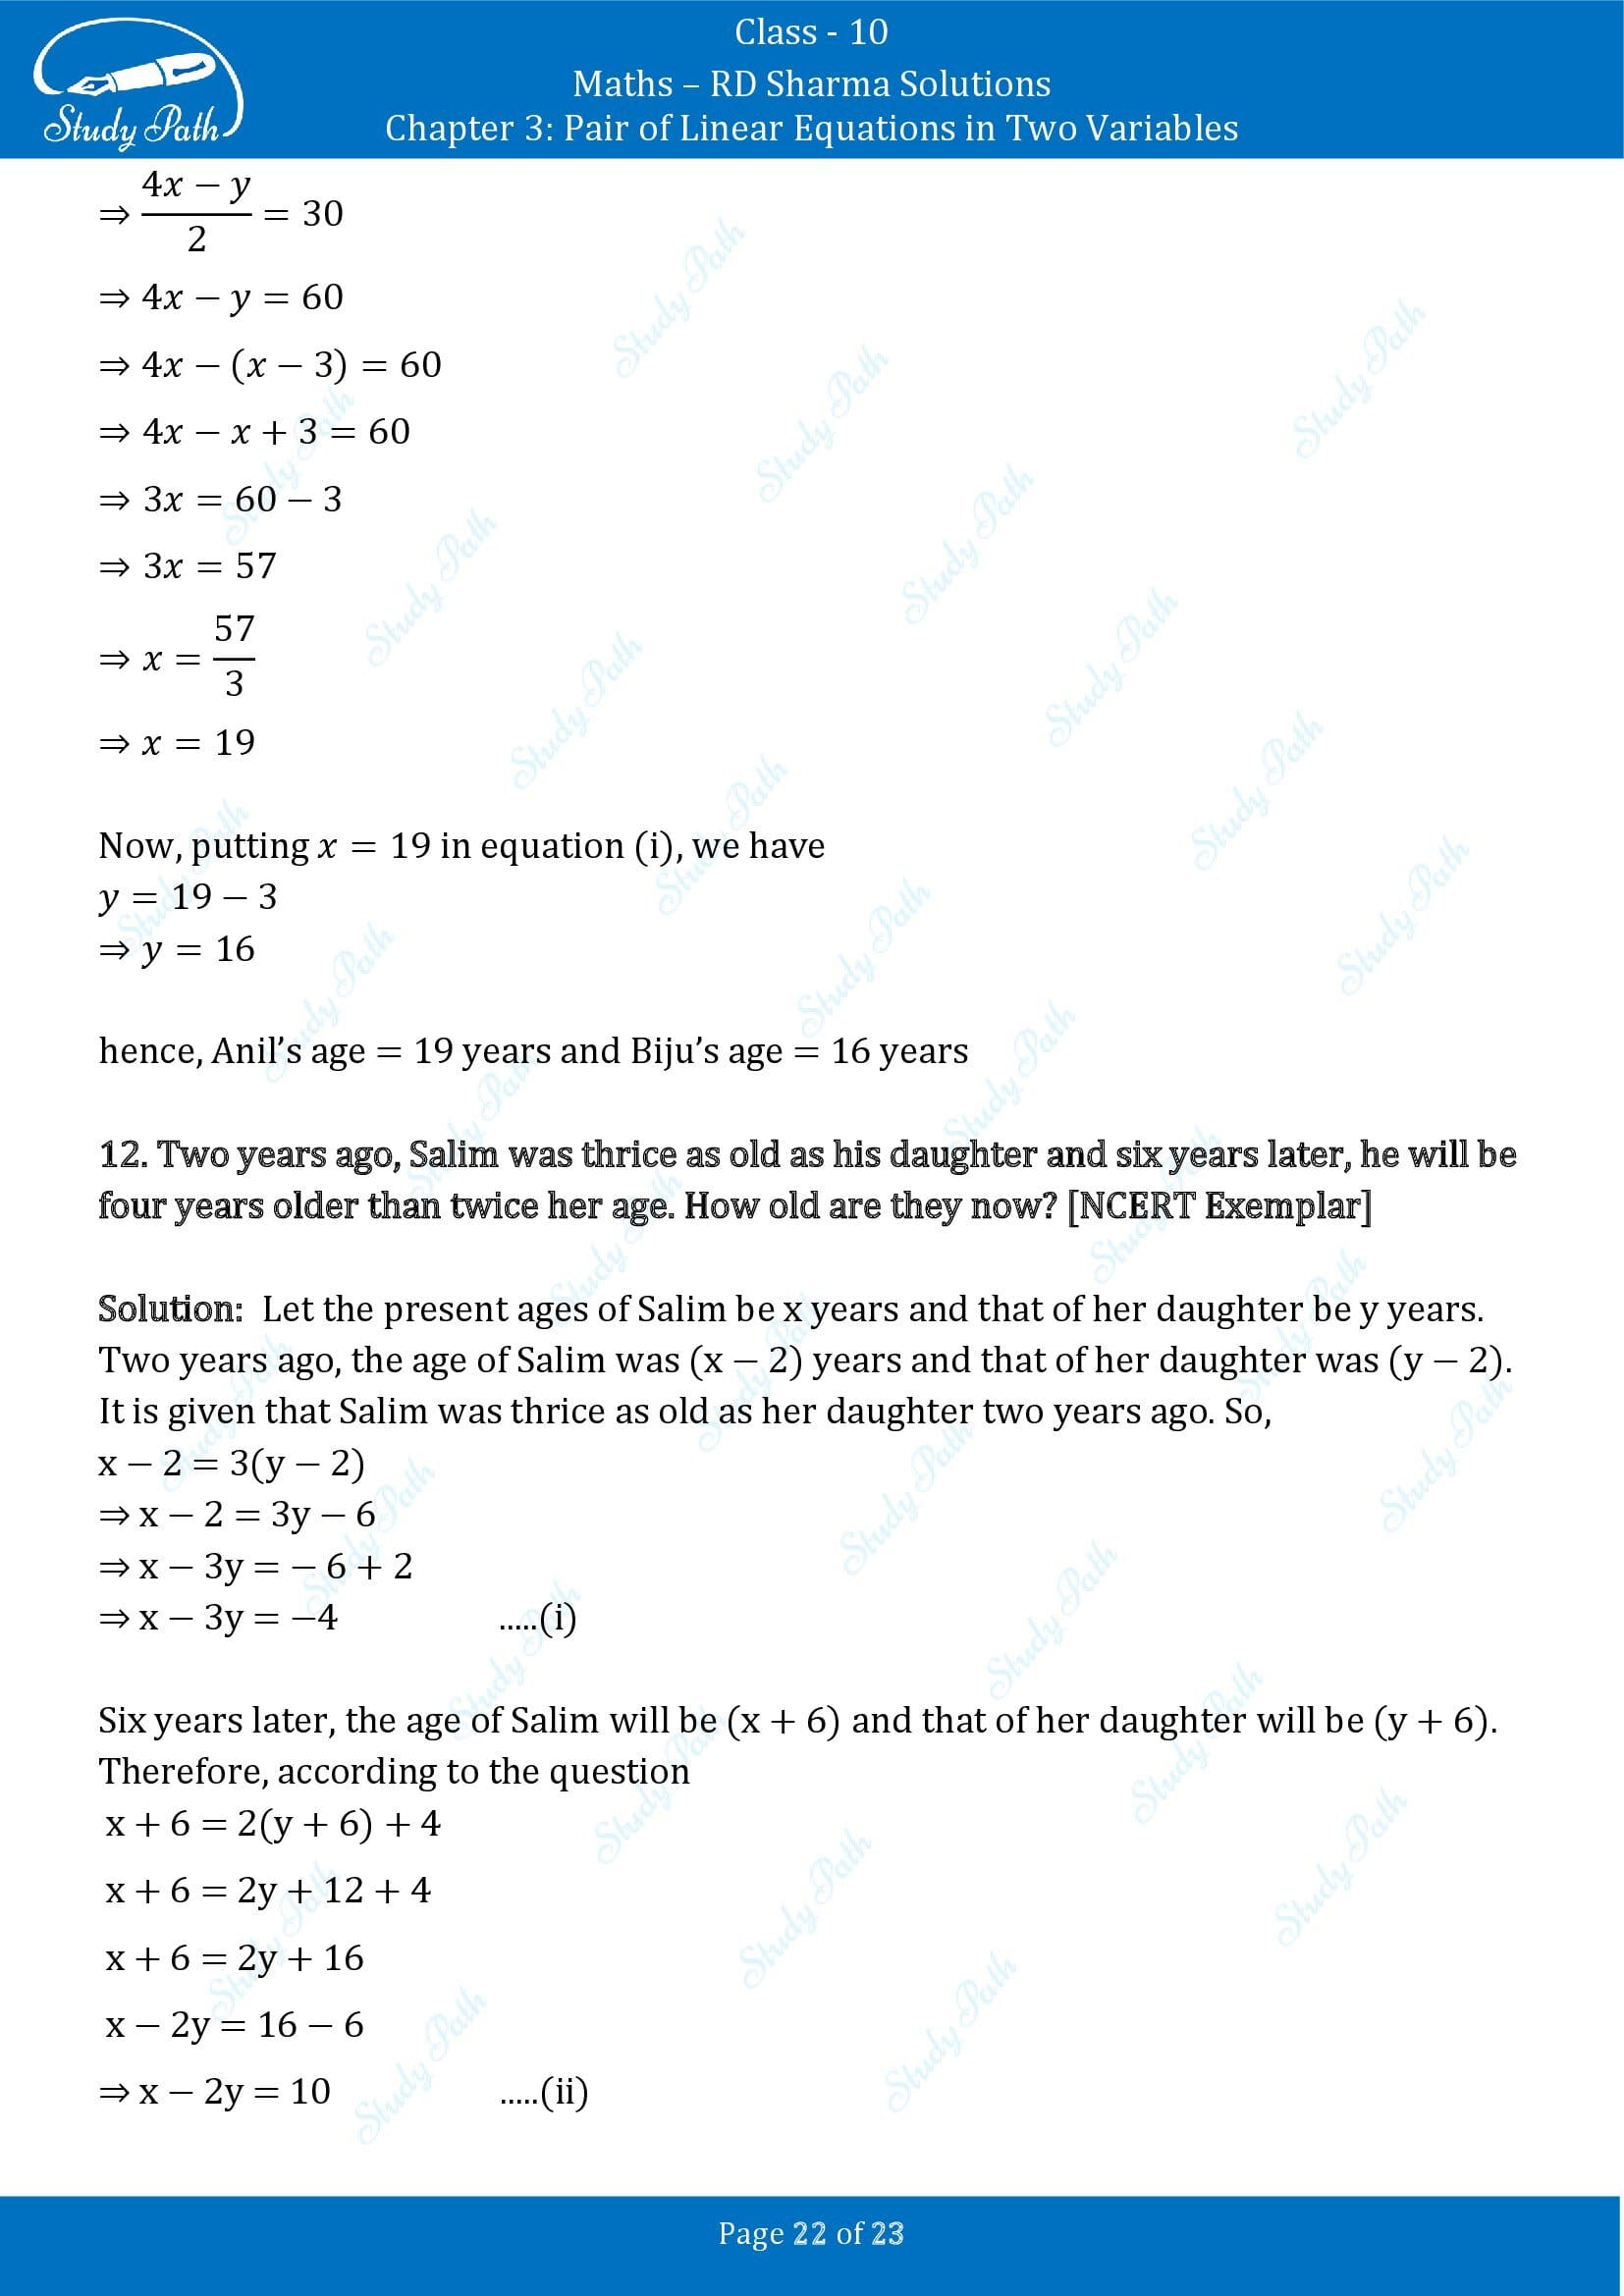 RD Sharma Solutions Class 10 Chapter 3 Pair of Linear Equations in Two Variables Exercise 3.8 00022